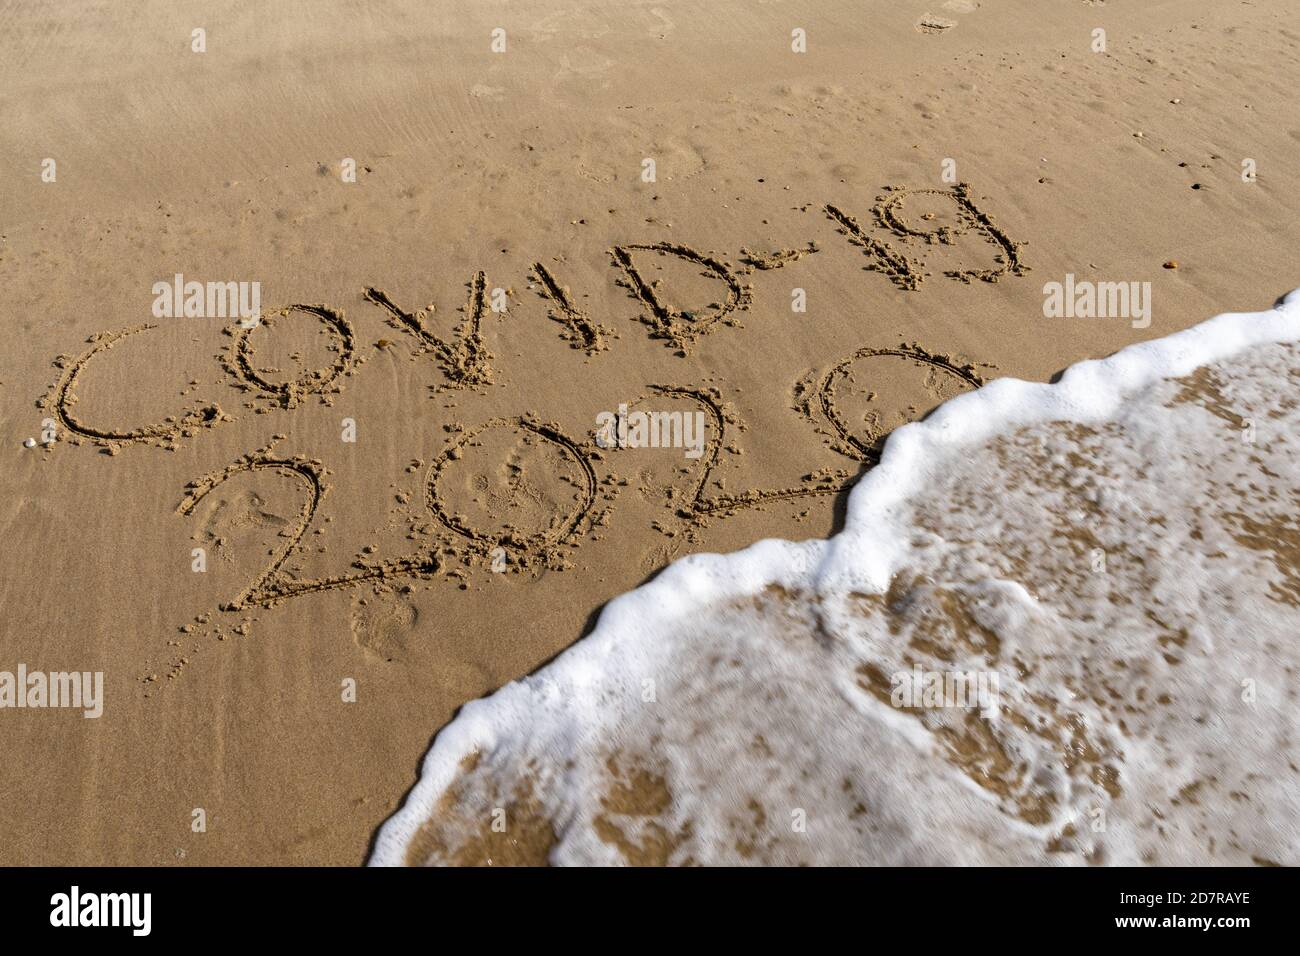 View of Covid-19 and 2020 text in sand on beach is covered by ocean wave and disappears Stock Photo